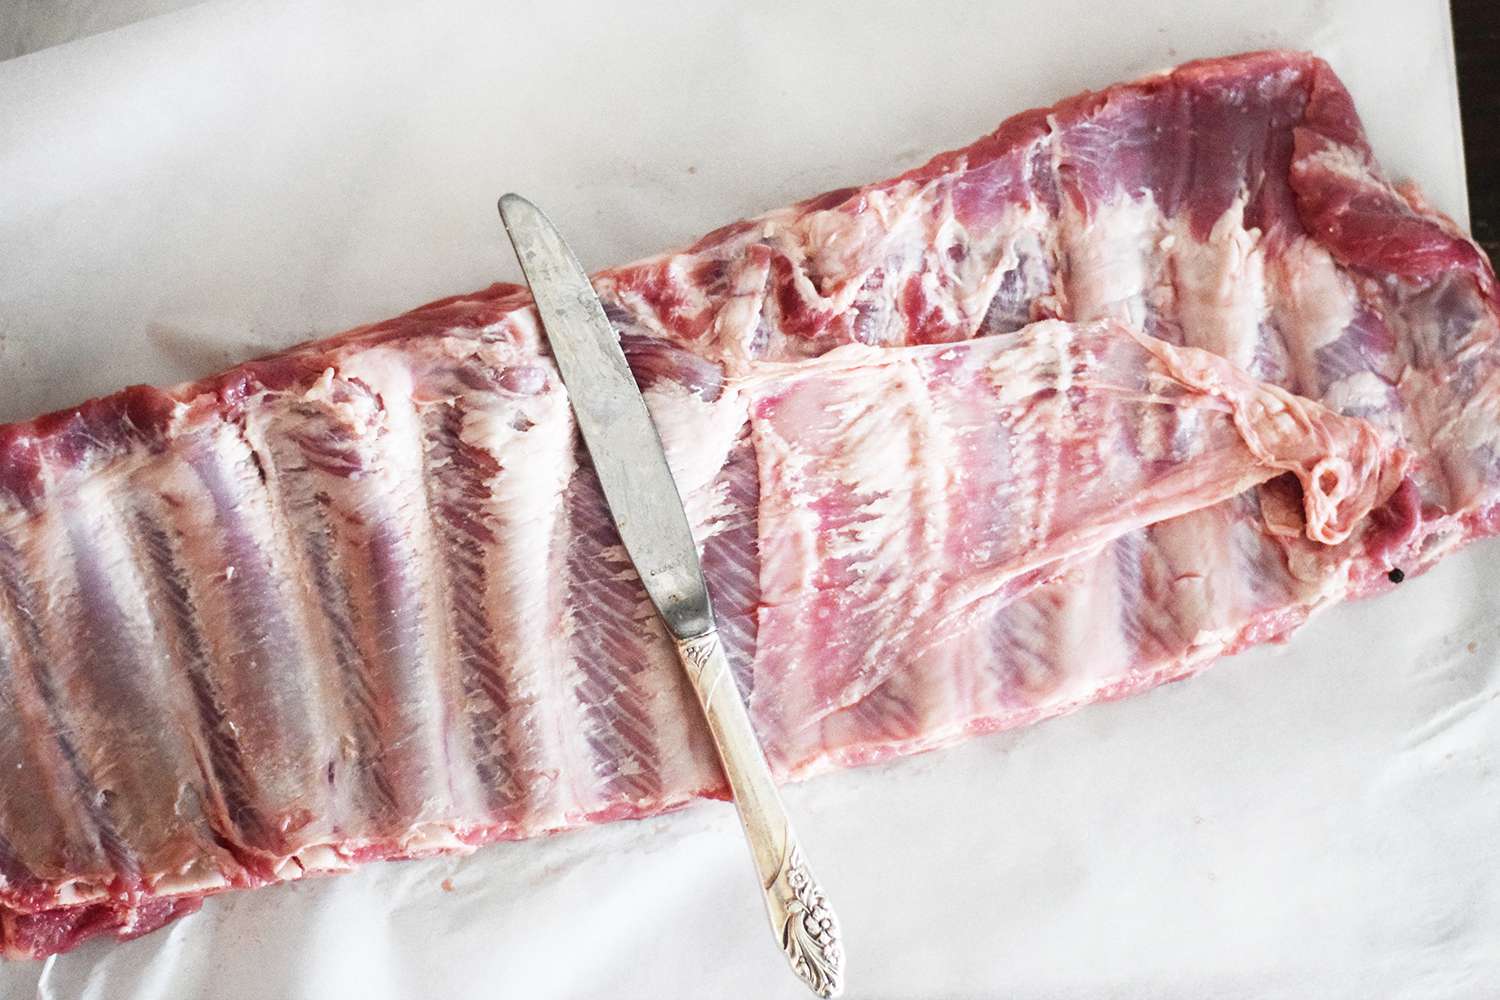 how-to-render-fat-off-spare-ribs